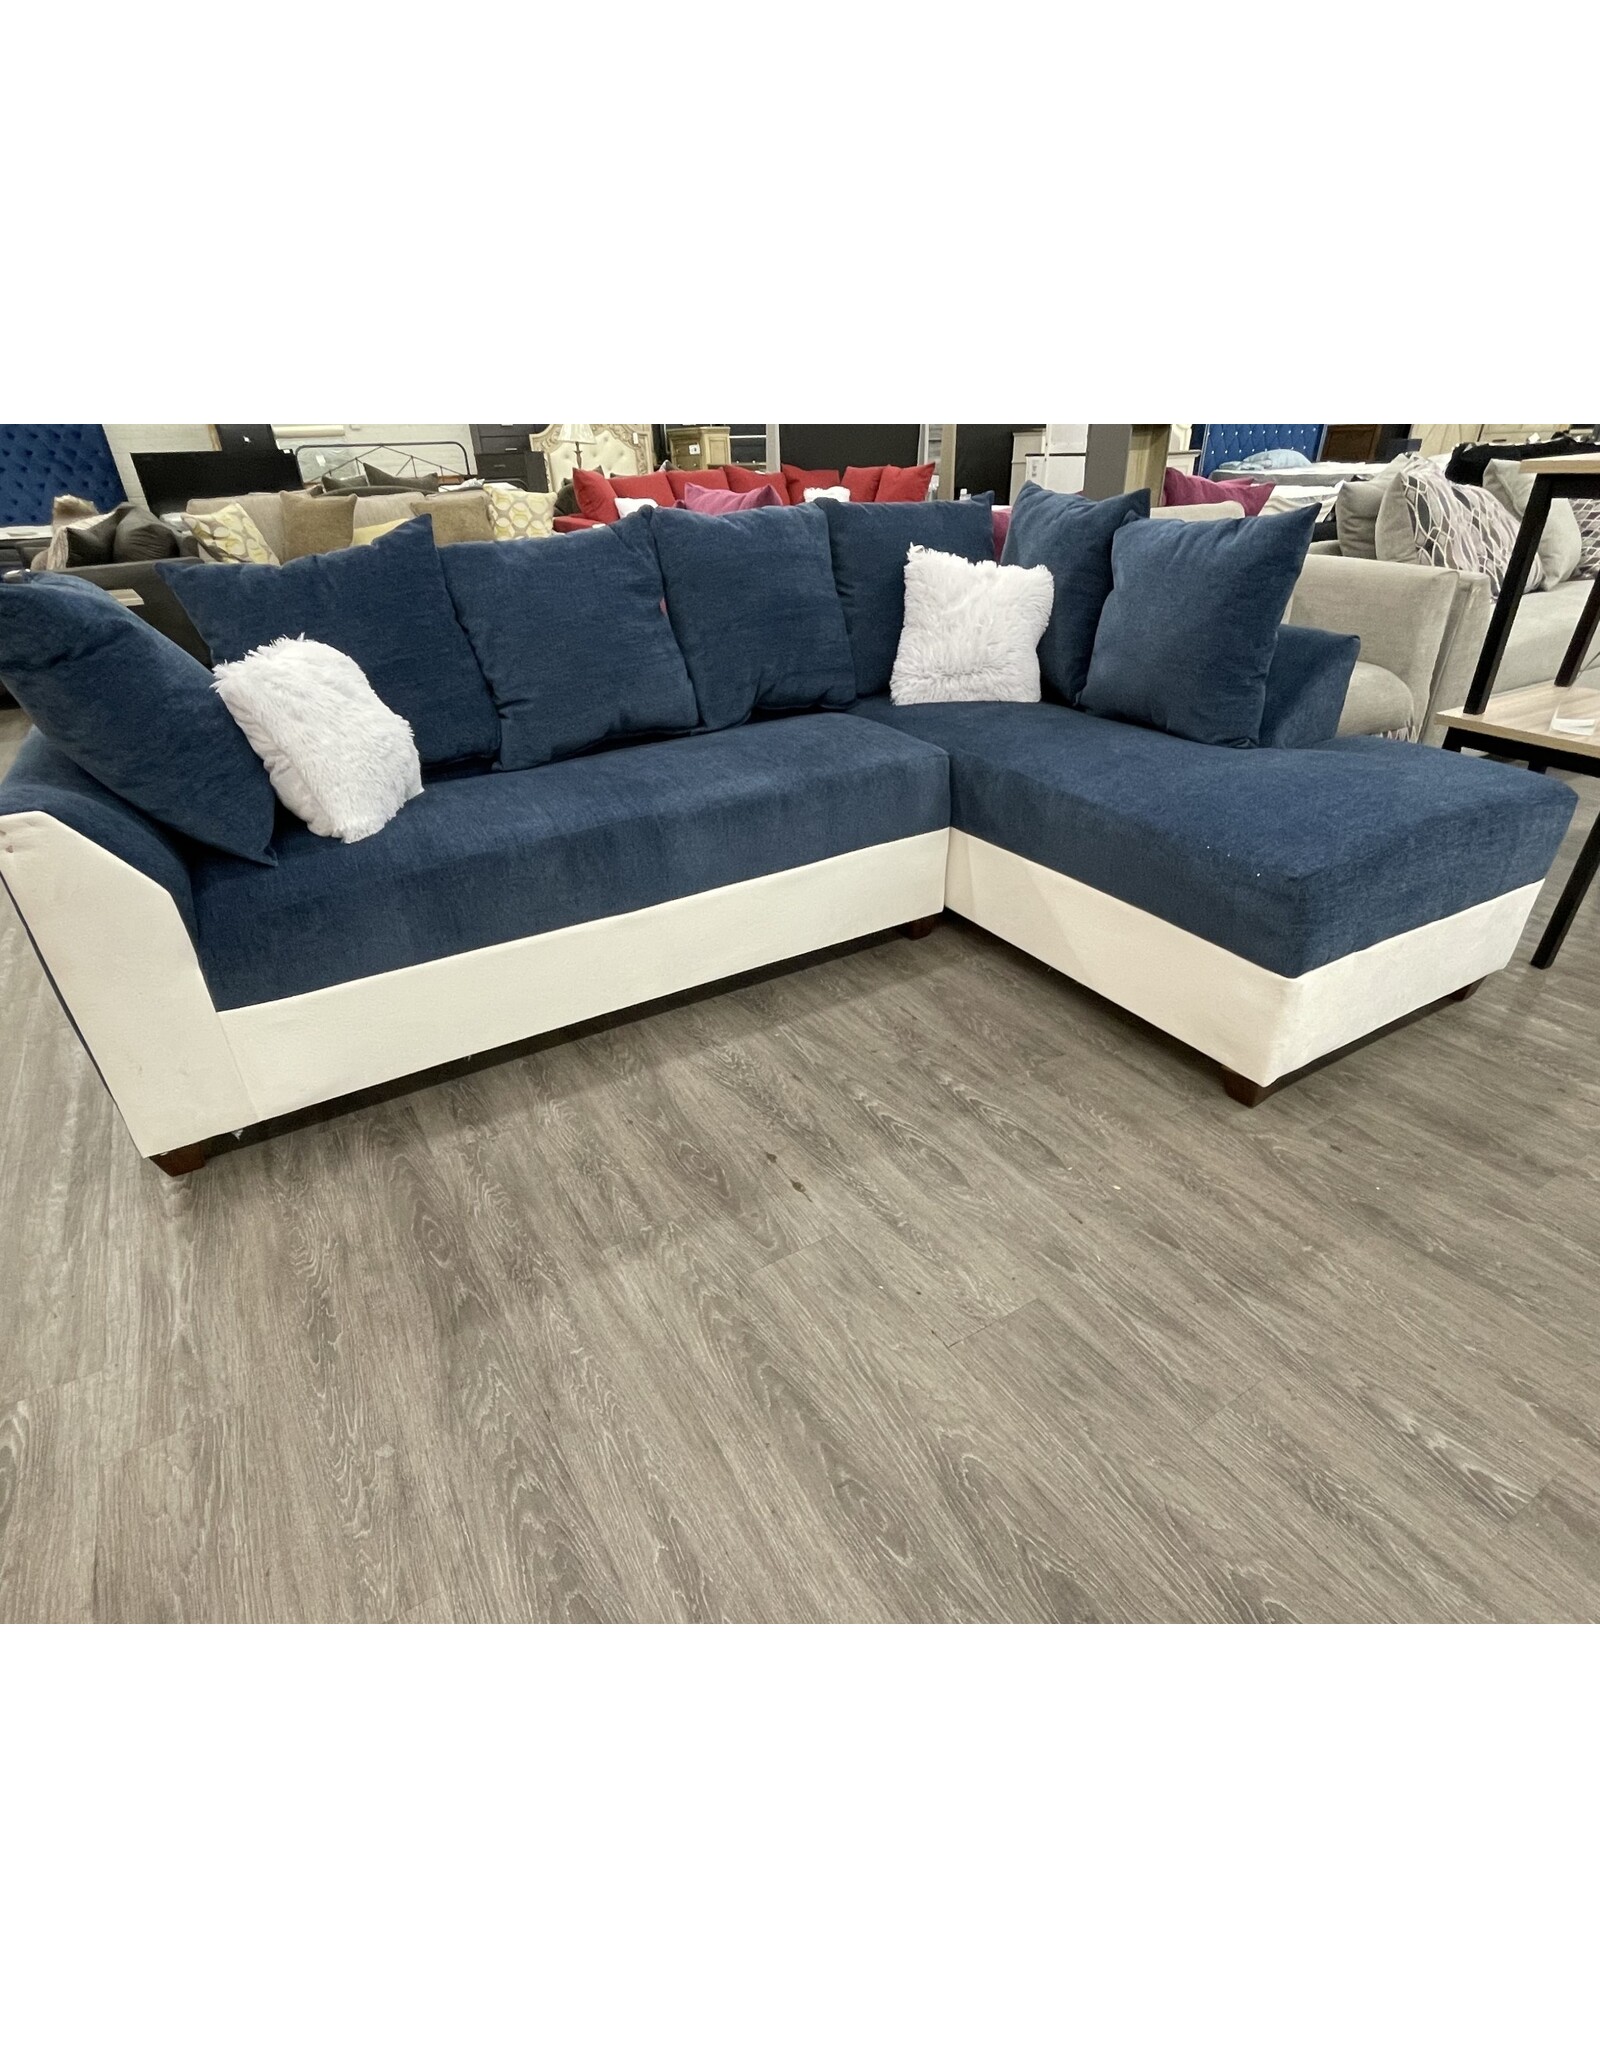 410 Sectional White Bicast